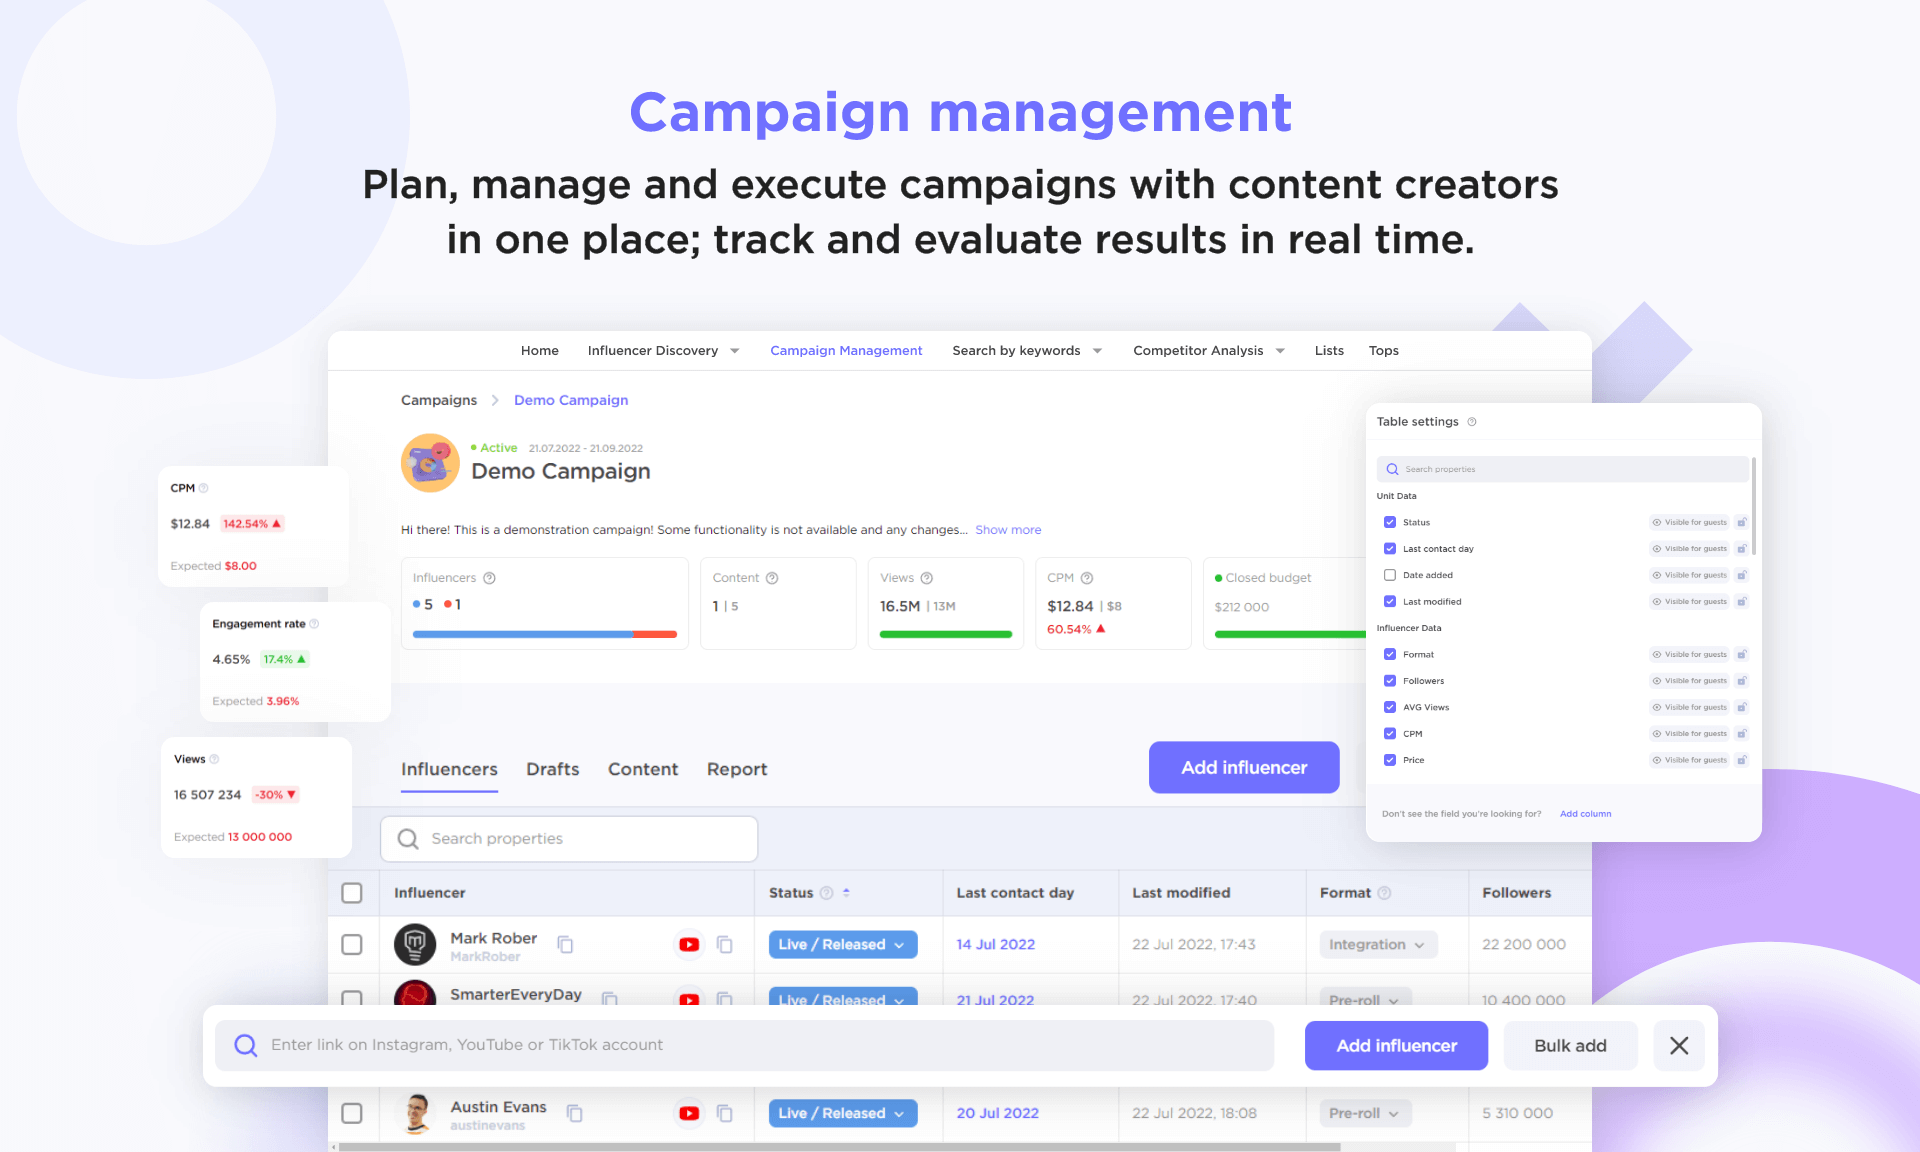 Campaign Management dashboard from Semrush